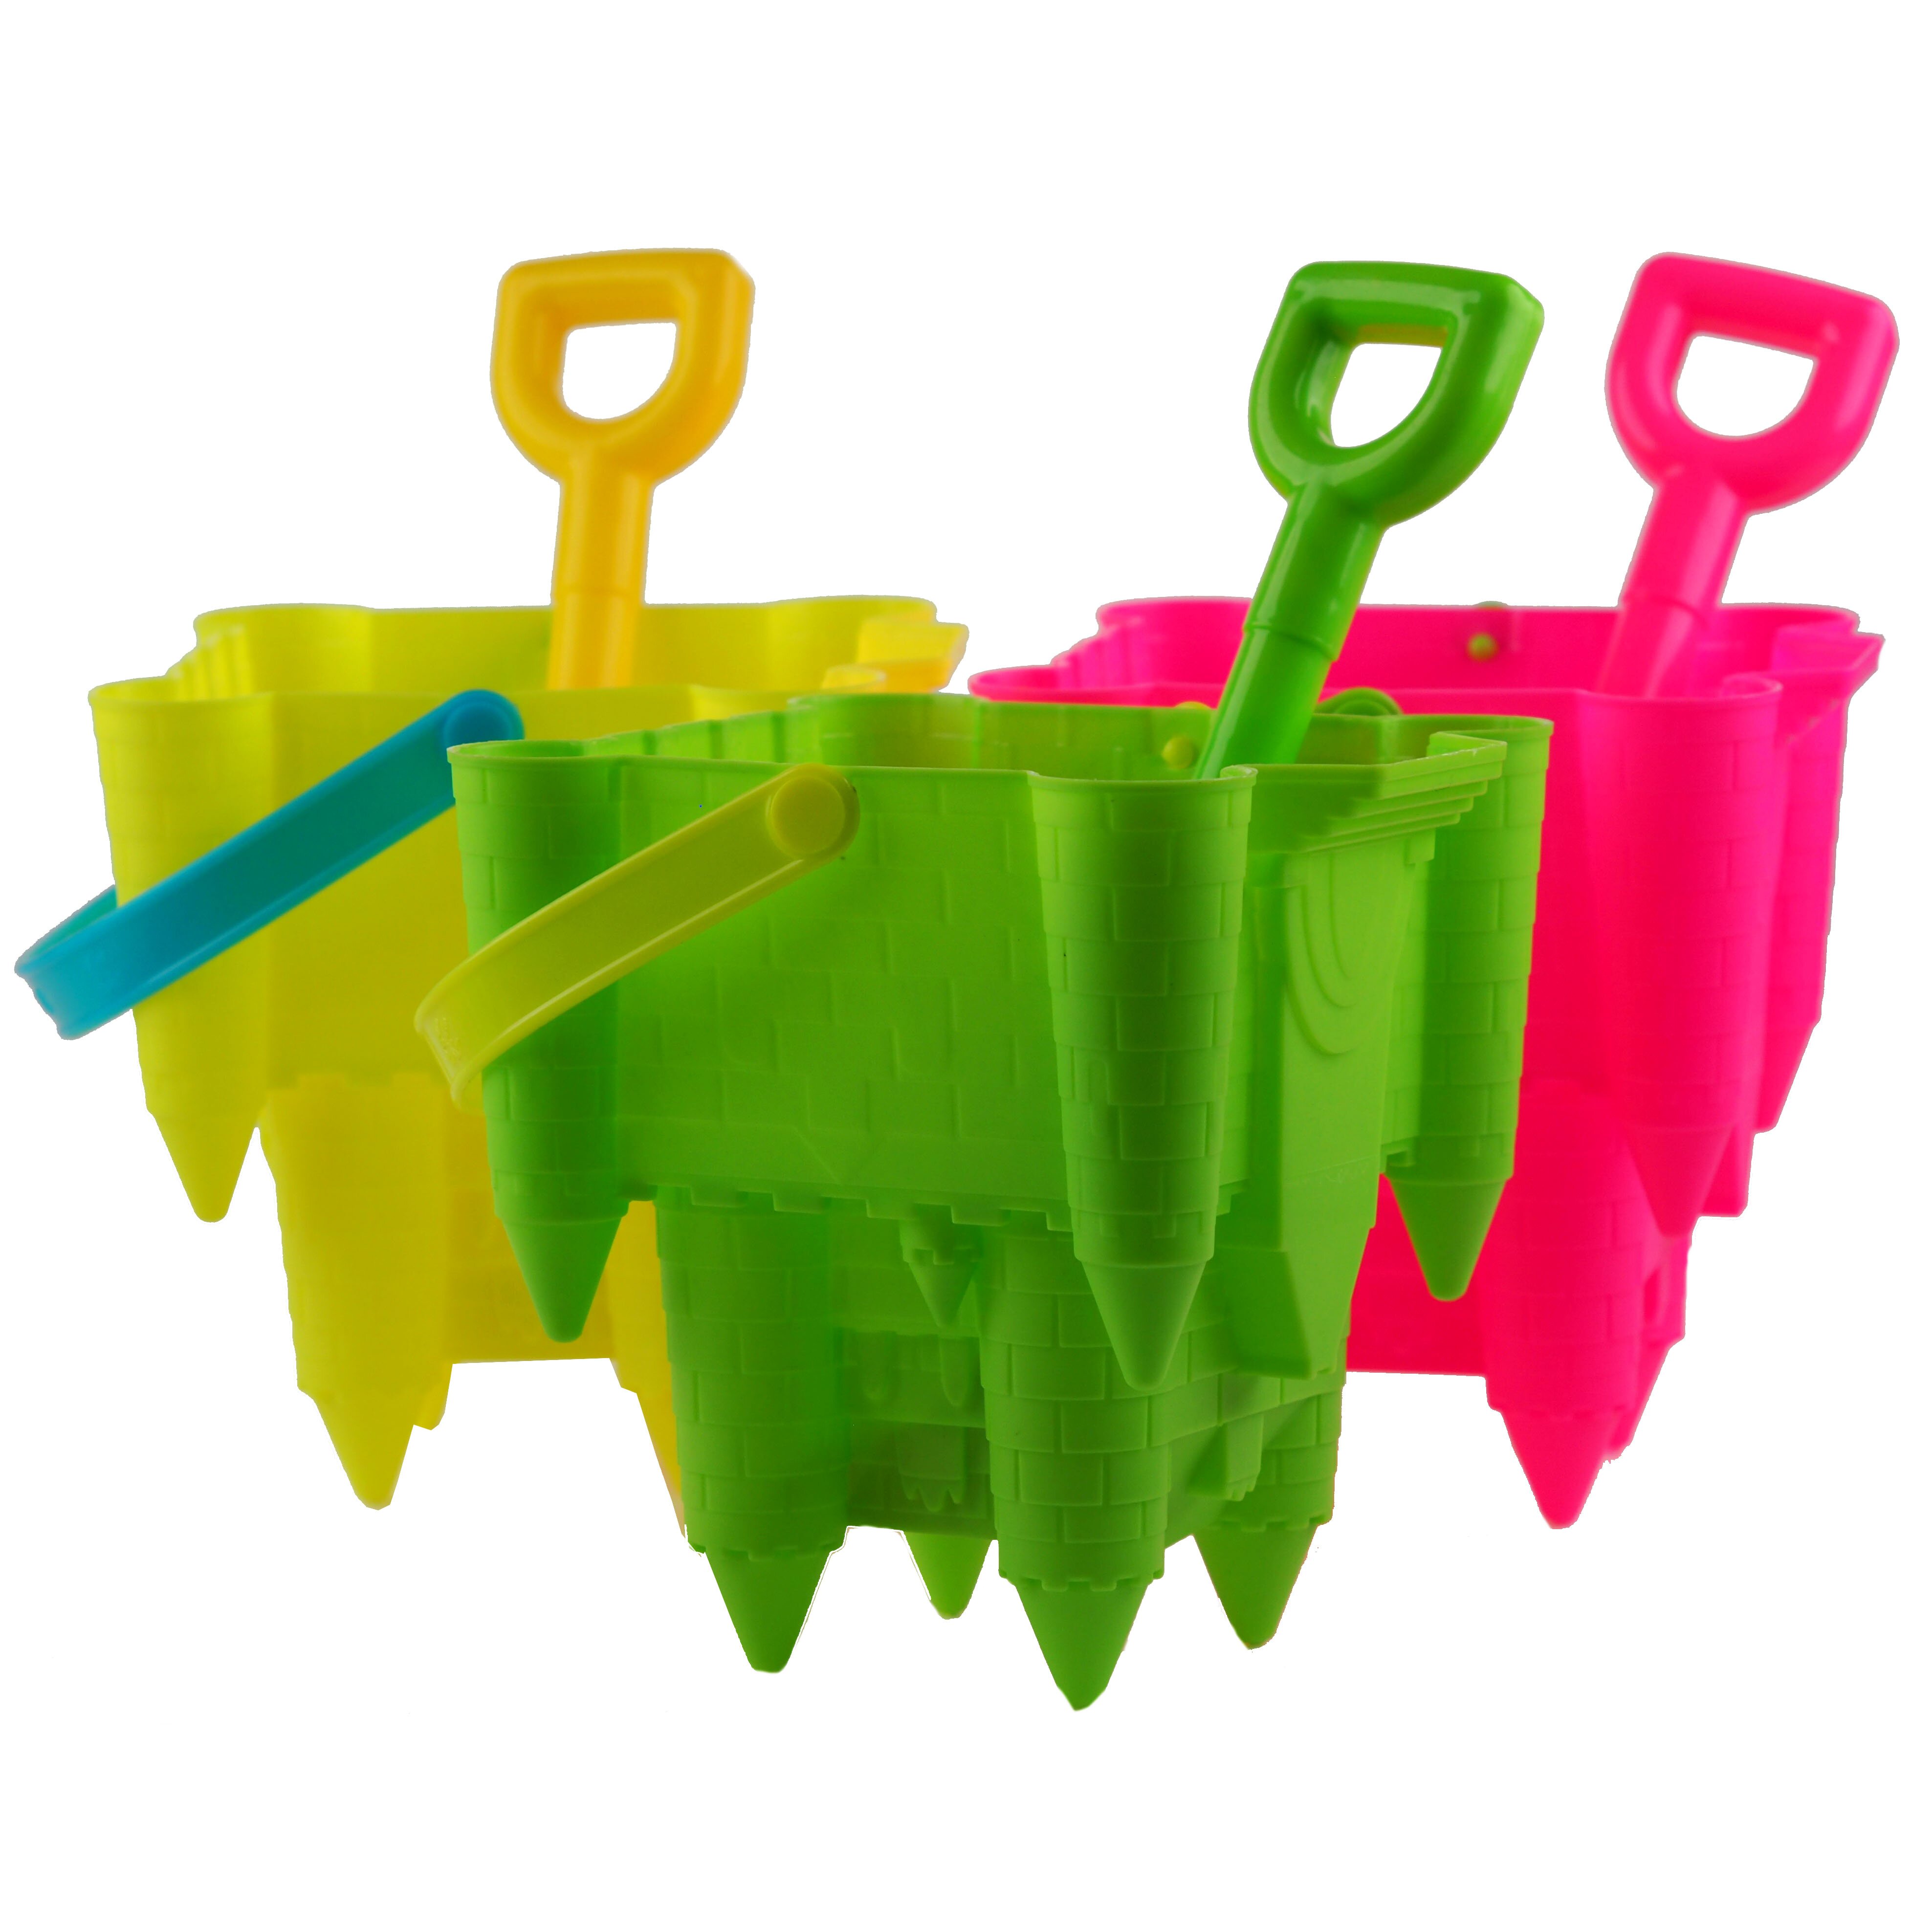 Sand Castle Shaped Bucket And Spade - Pink Yellow Green (Set of 3)